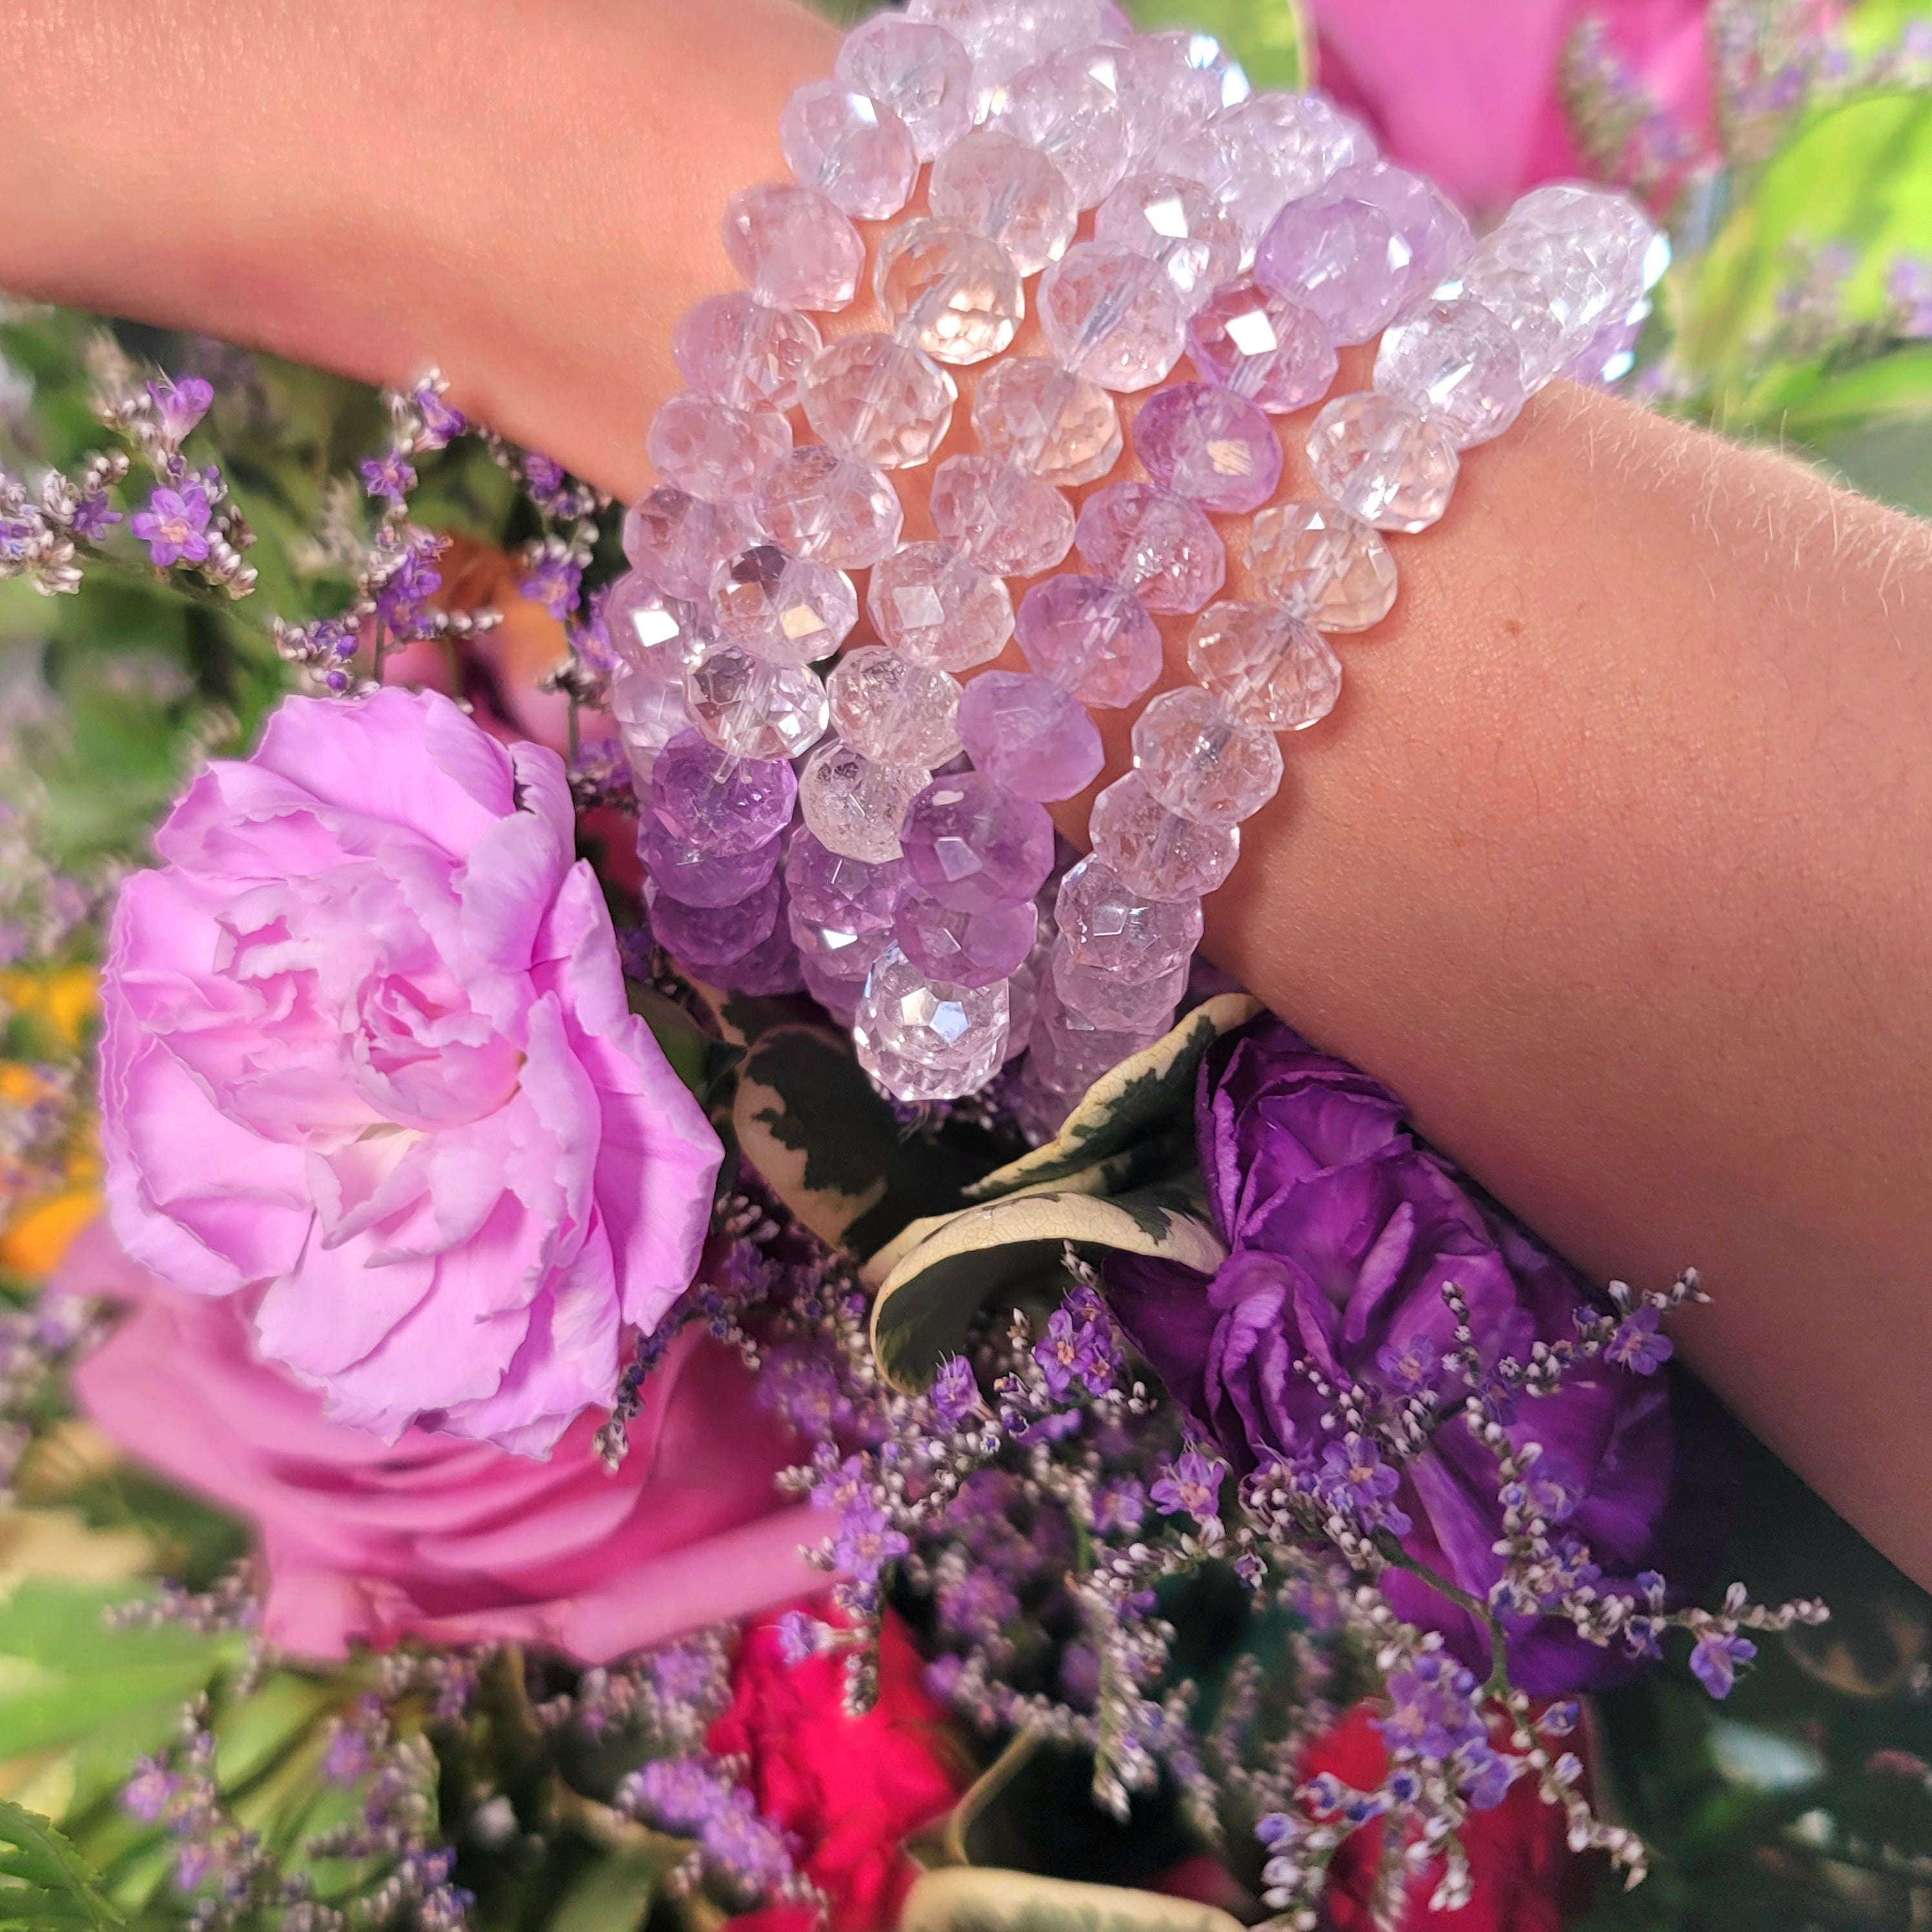 Amethyst Faceted Waterfall Rondell Bracelet for Intuition, Connection with the Divine and Sobriety